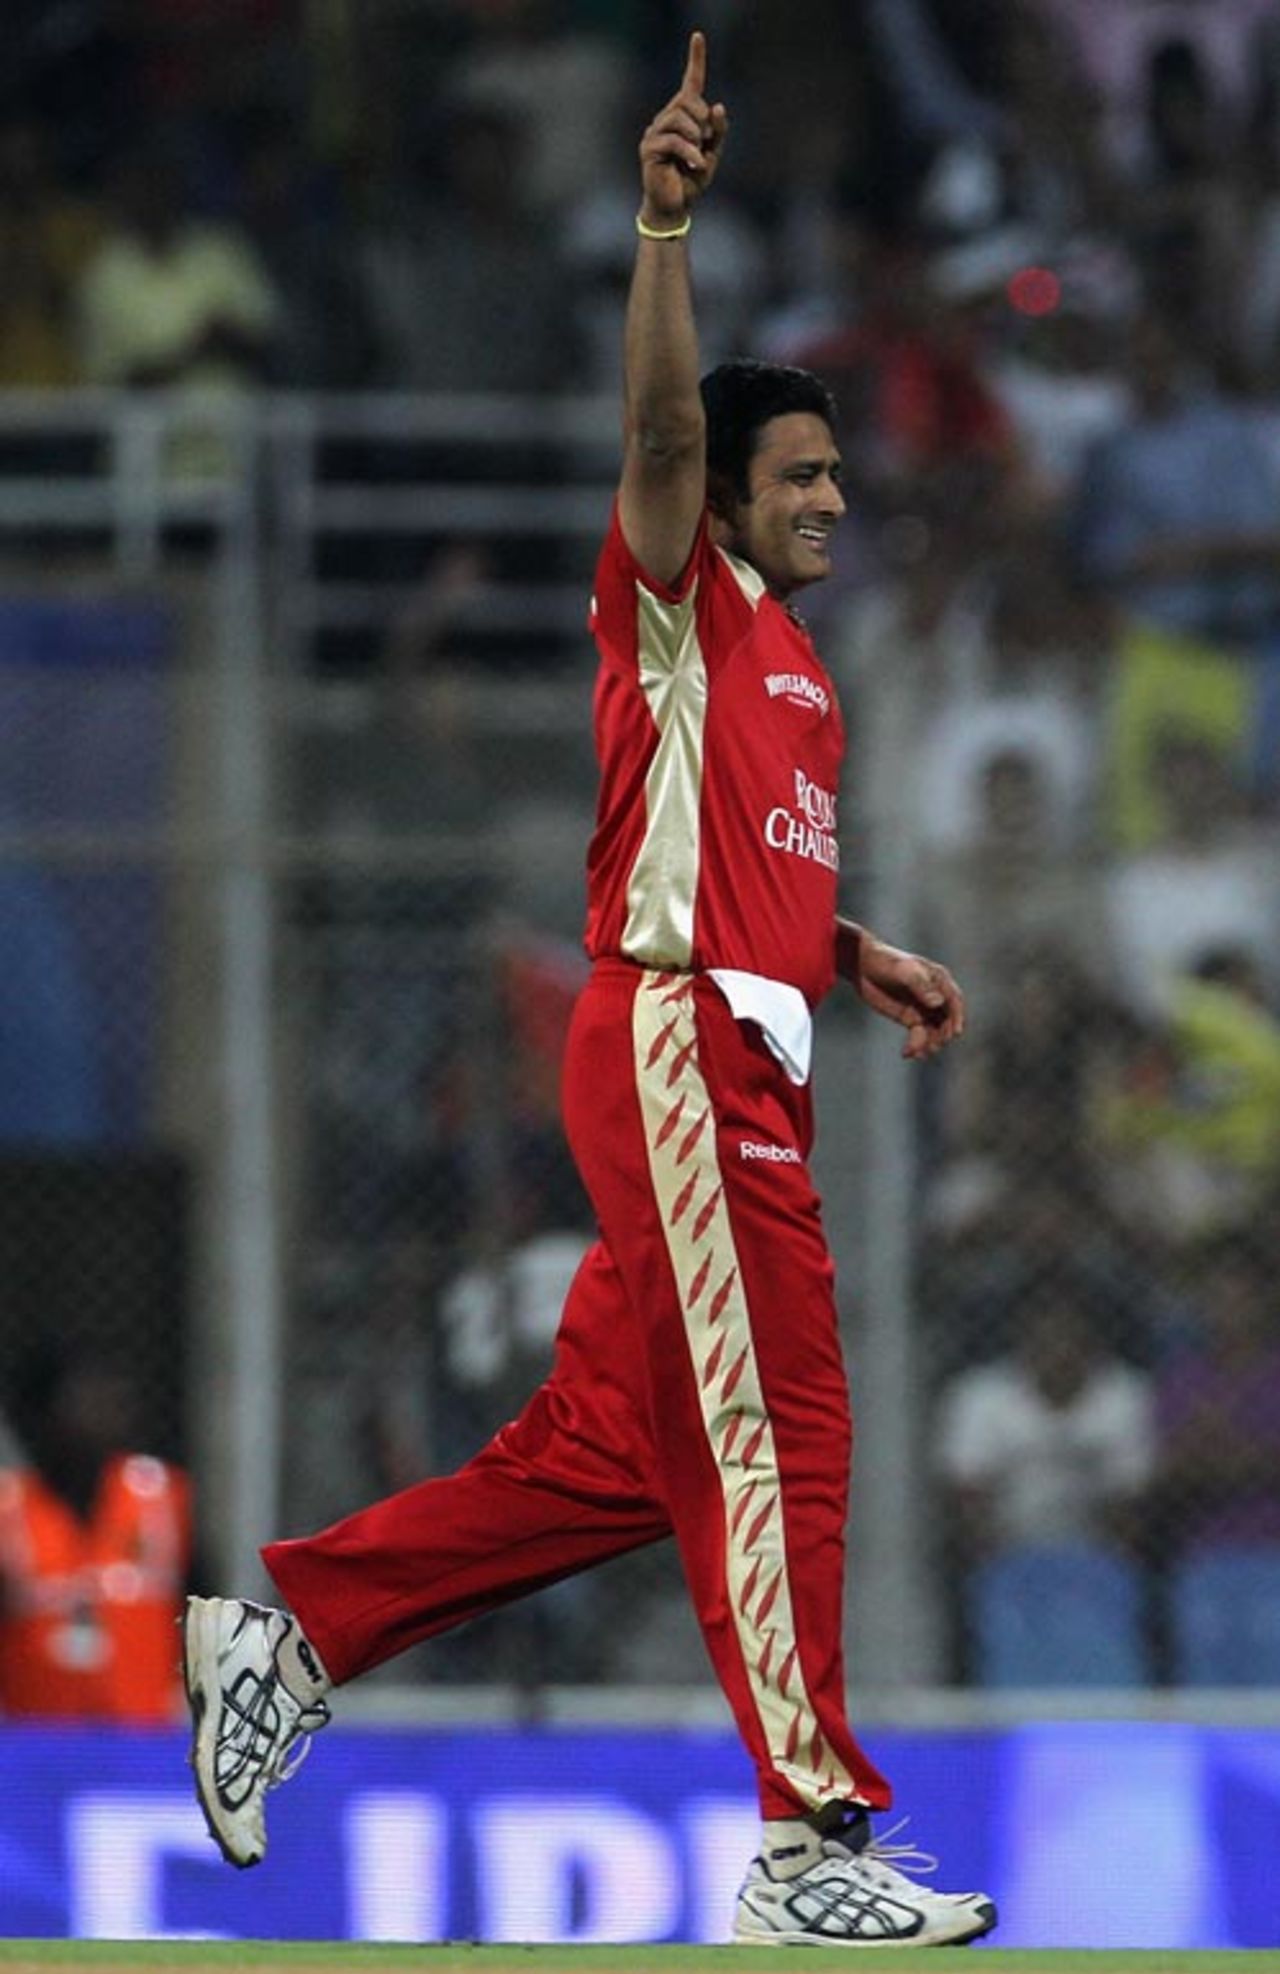 Anil Kumble is a happy man after dismissing Adam Gilchrist early, Deccan Chargers v Royal Challengers Bangalore, IPL, Mumbai, April 24, 2010